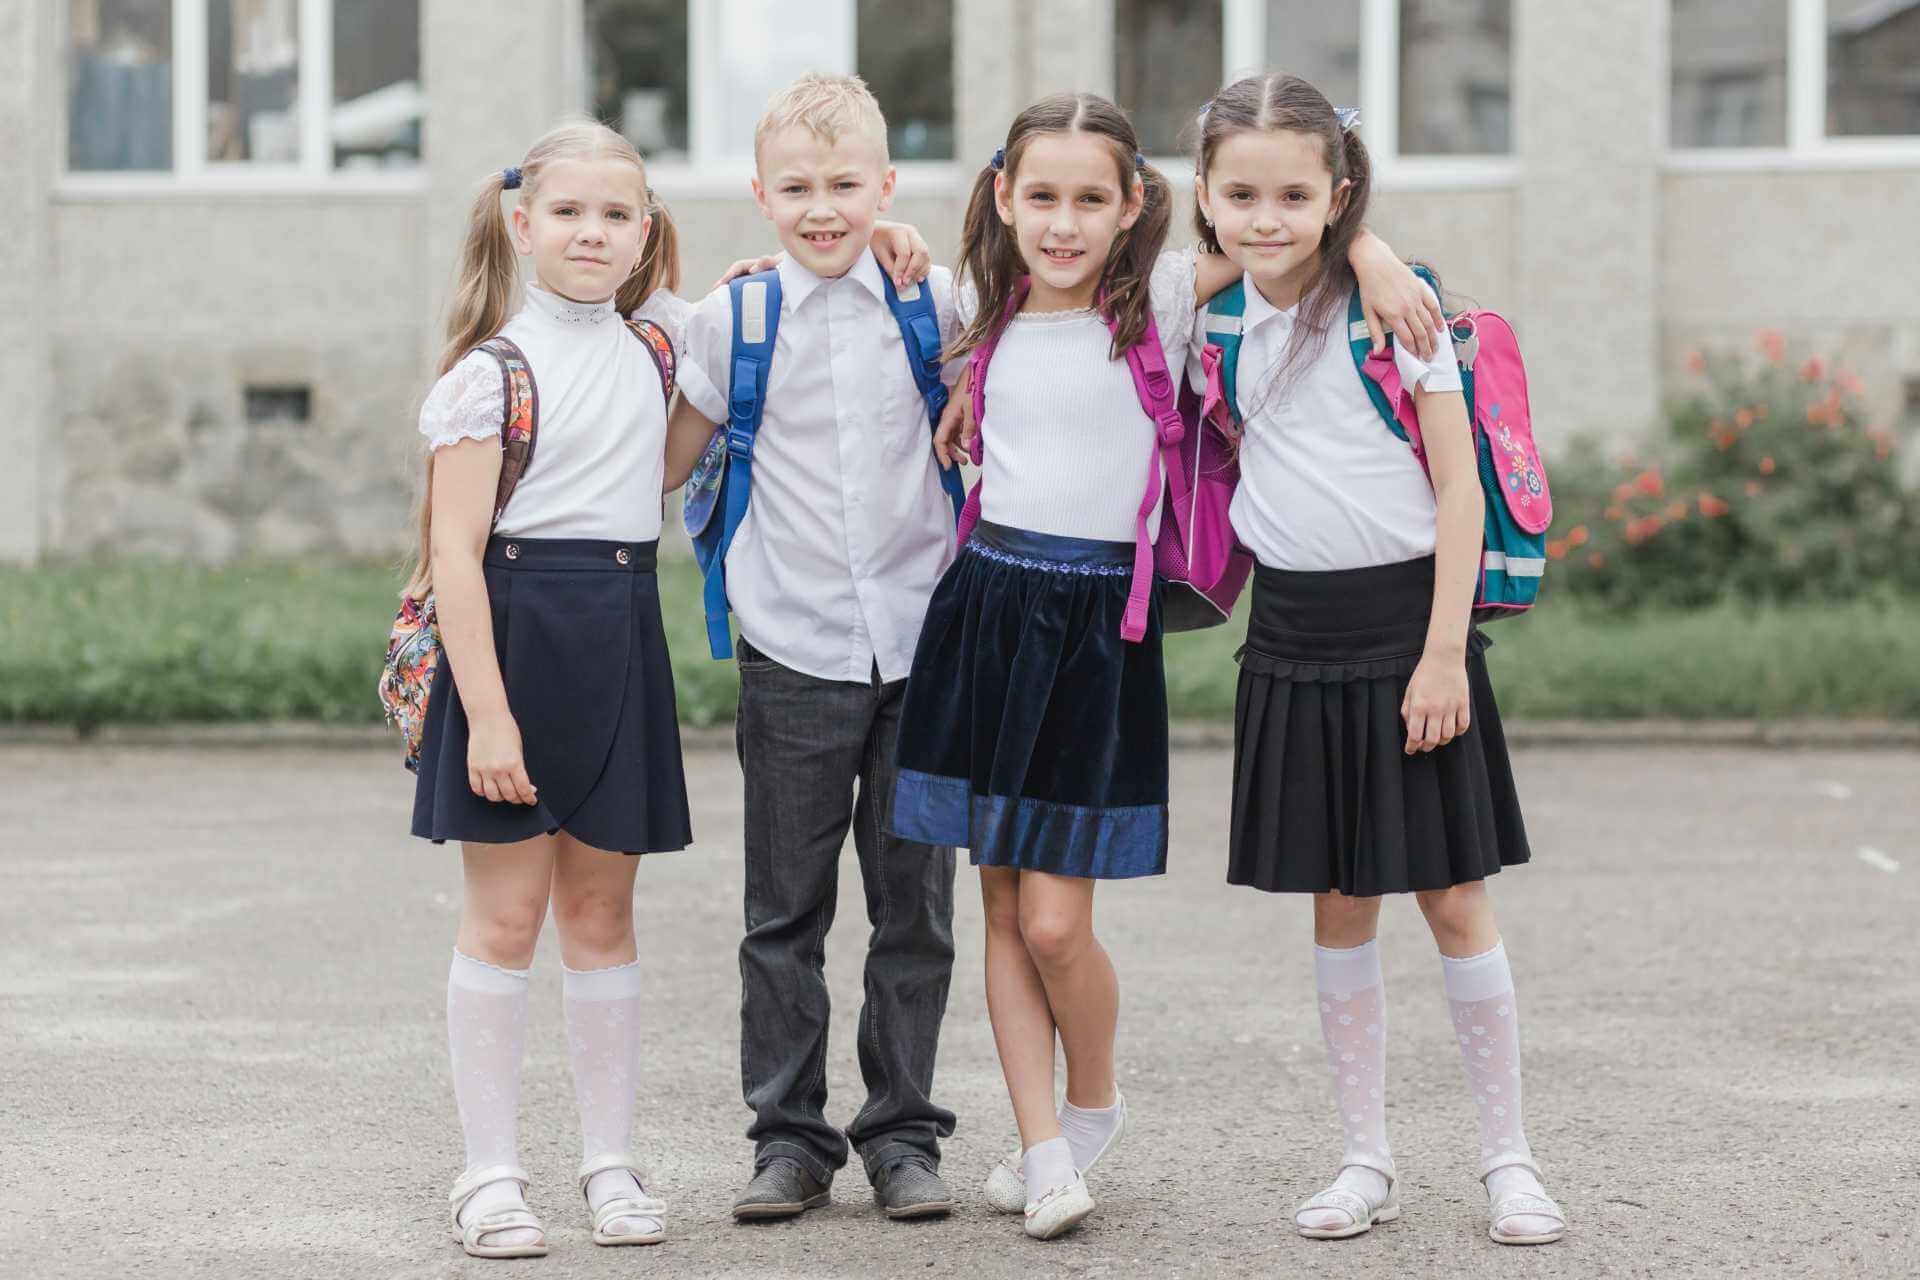 boy and girls are in school uniform and hugging each other in school